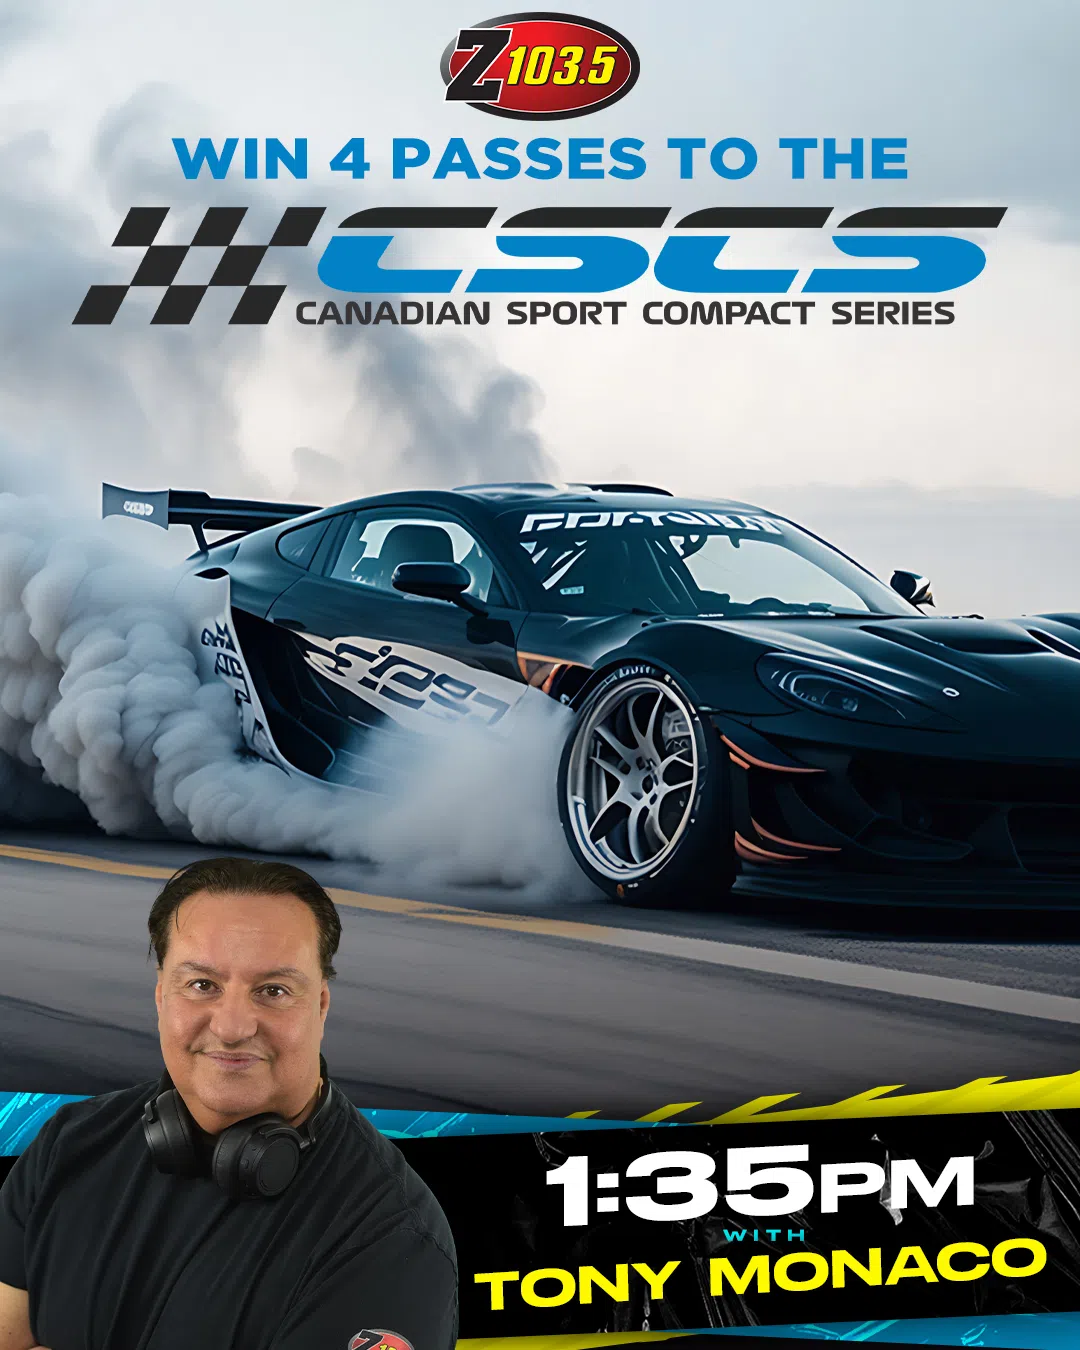 Feature: https://z1035.com/win/win-passes-to-the-canadian-sport-compact-series/